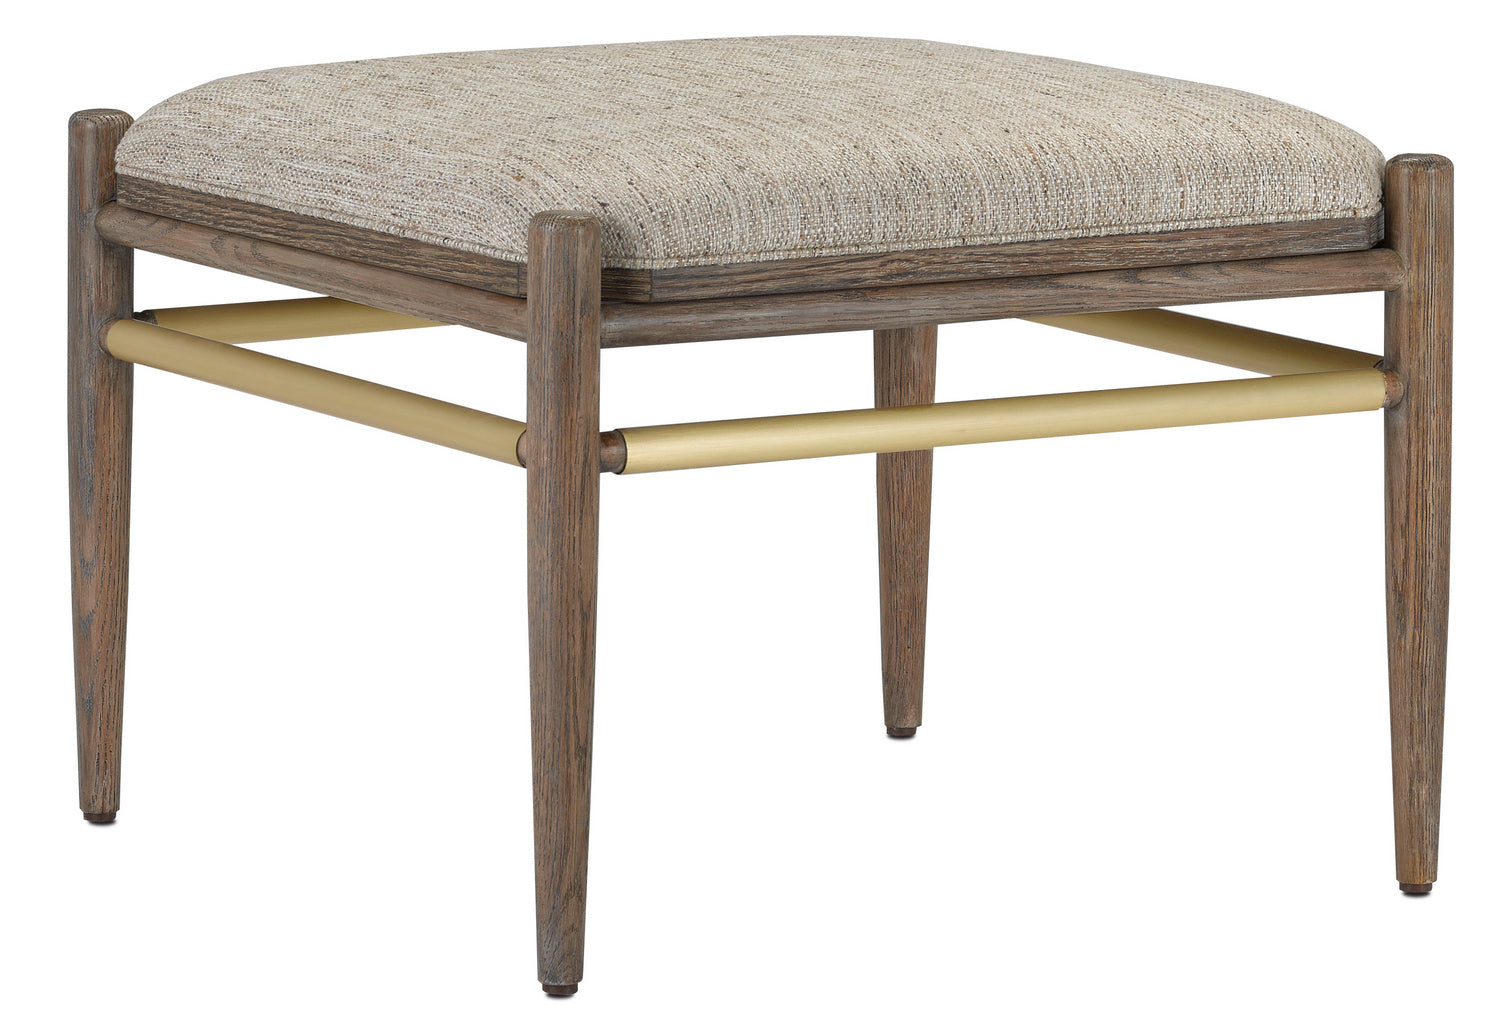 Ottoman from the Visby collection in Light Pepper/Brushed Brass finish